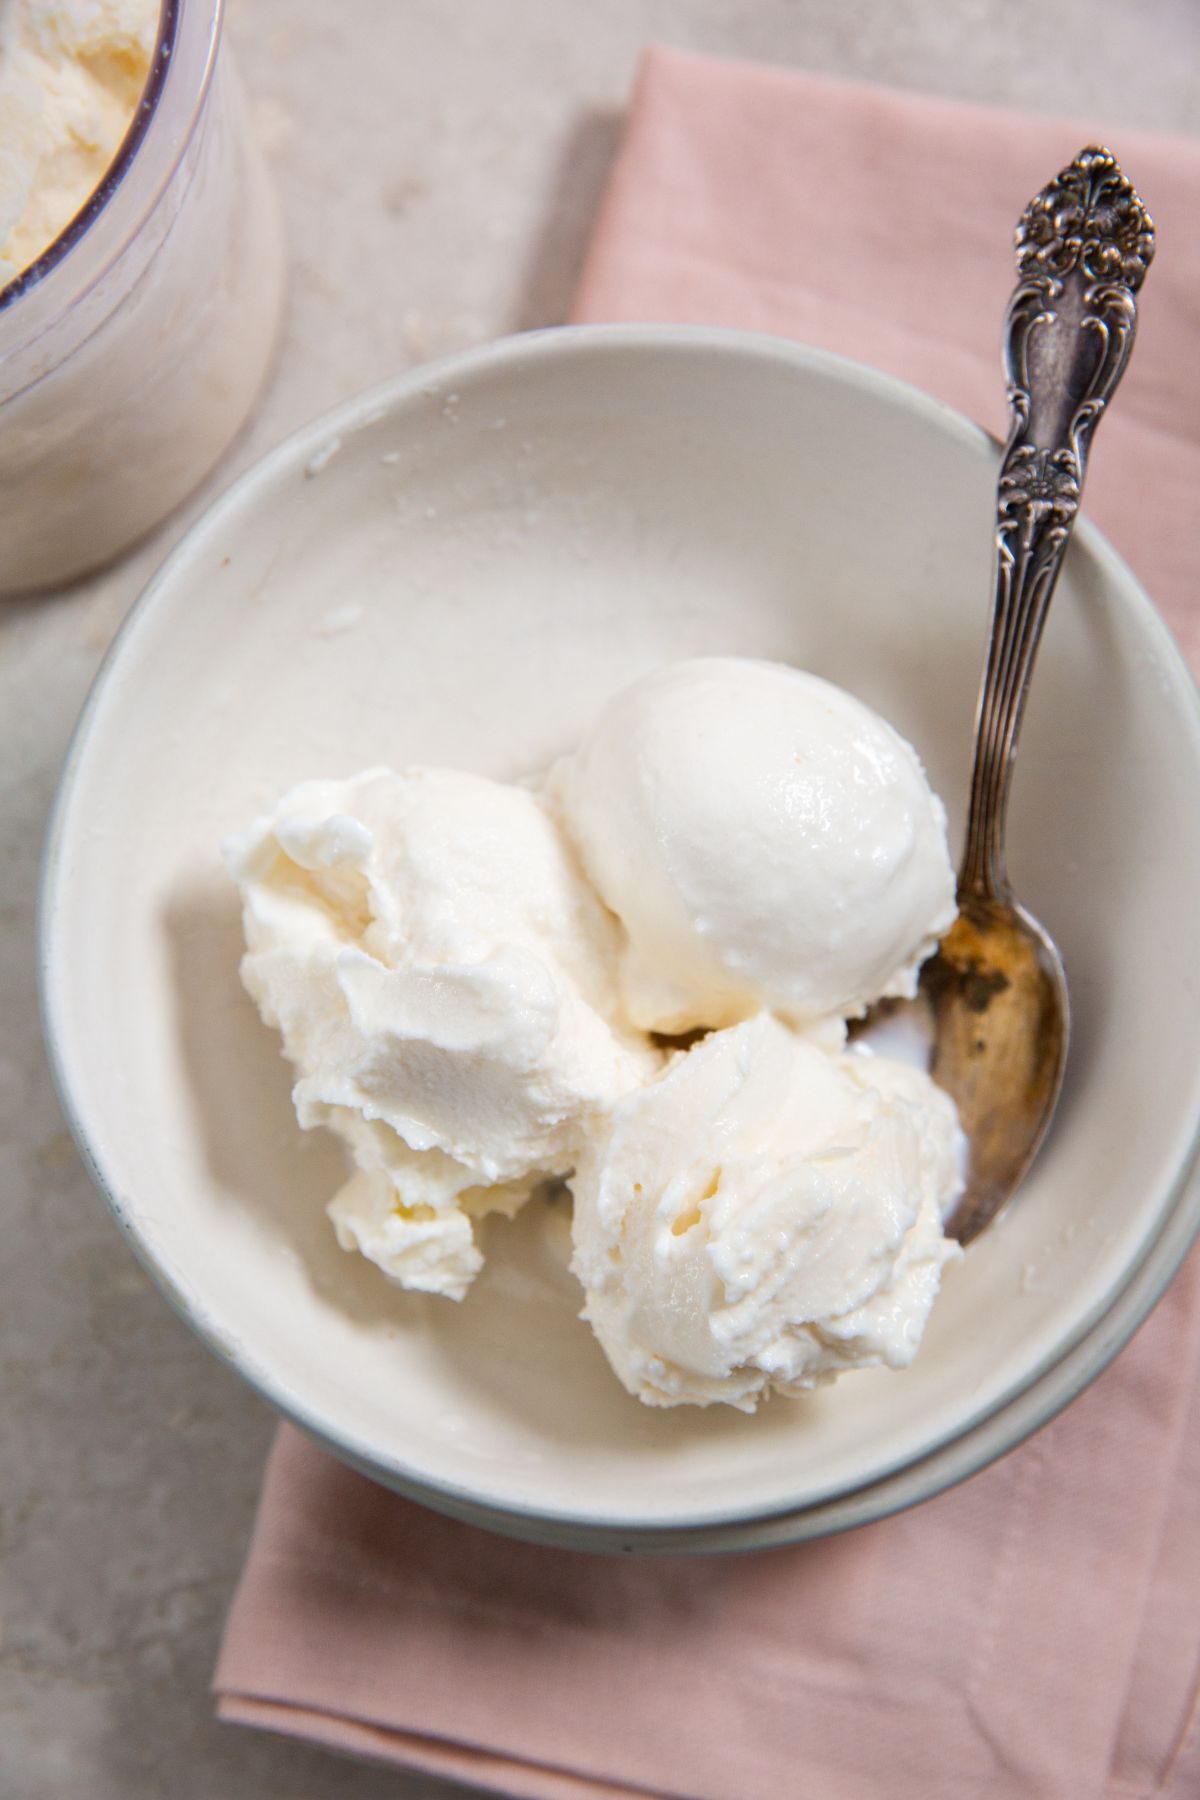 Ninja Creami Vanilla Ice Cream in a white bowl with a spoon and pink napkin